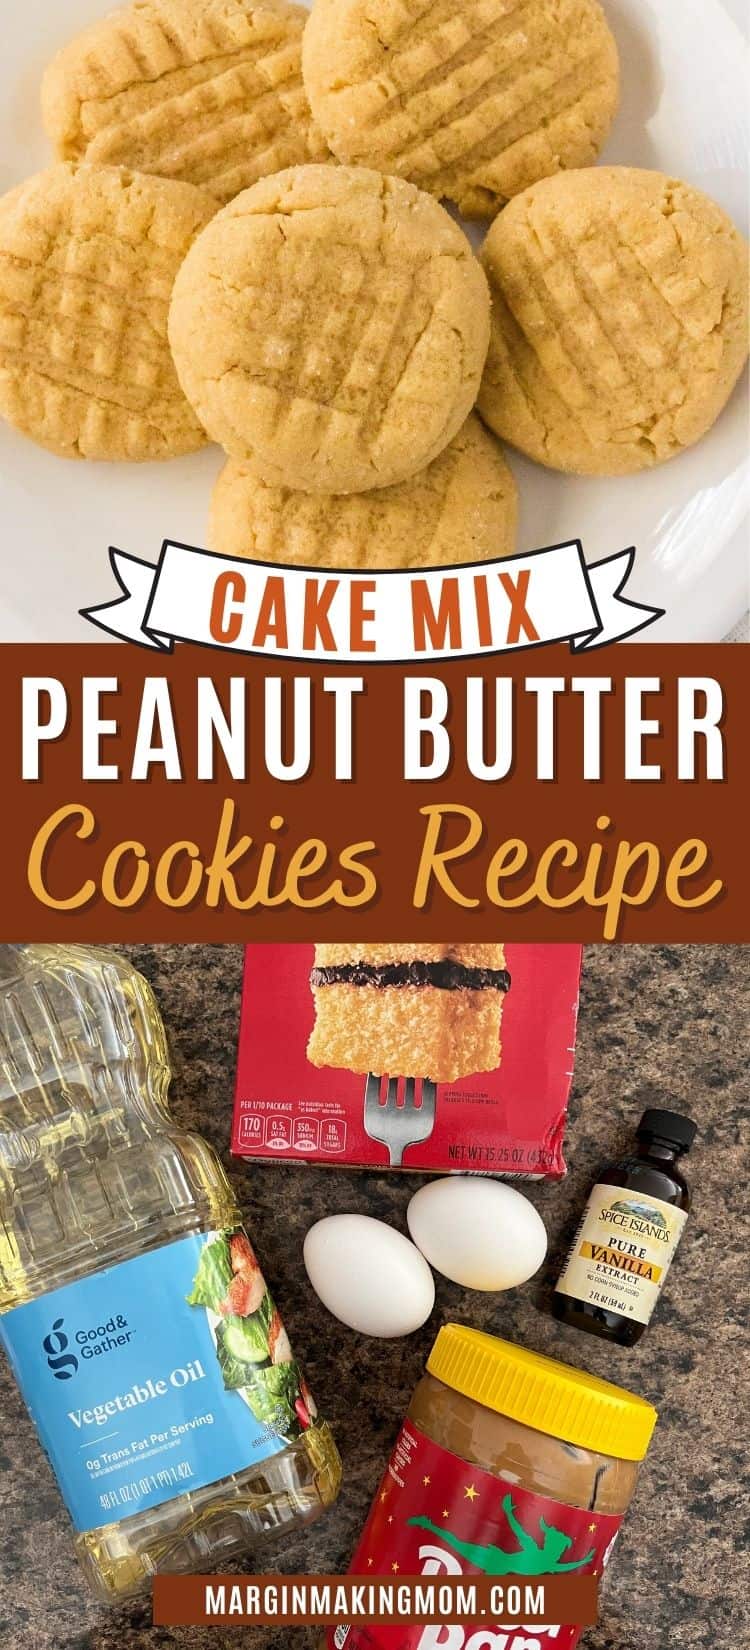 two photos; one shows freshly baked cake mix peanut butter cookies, while the other shows the ingredients for preparing the cookies.